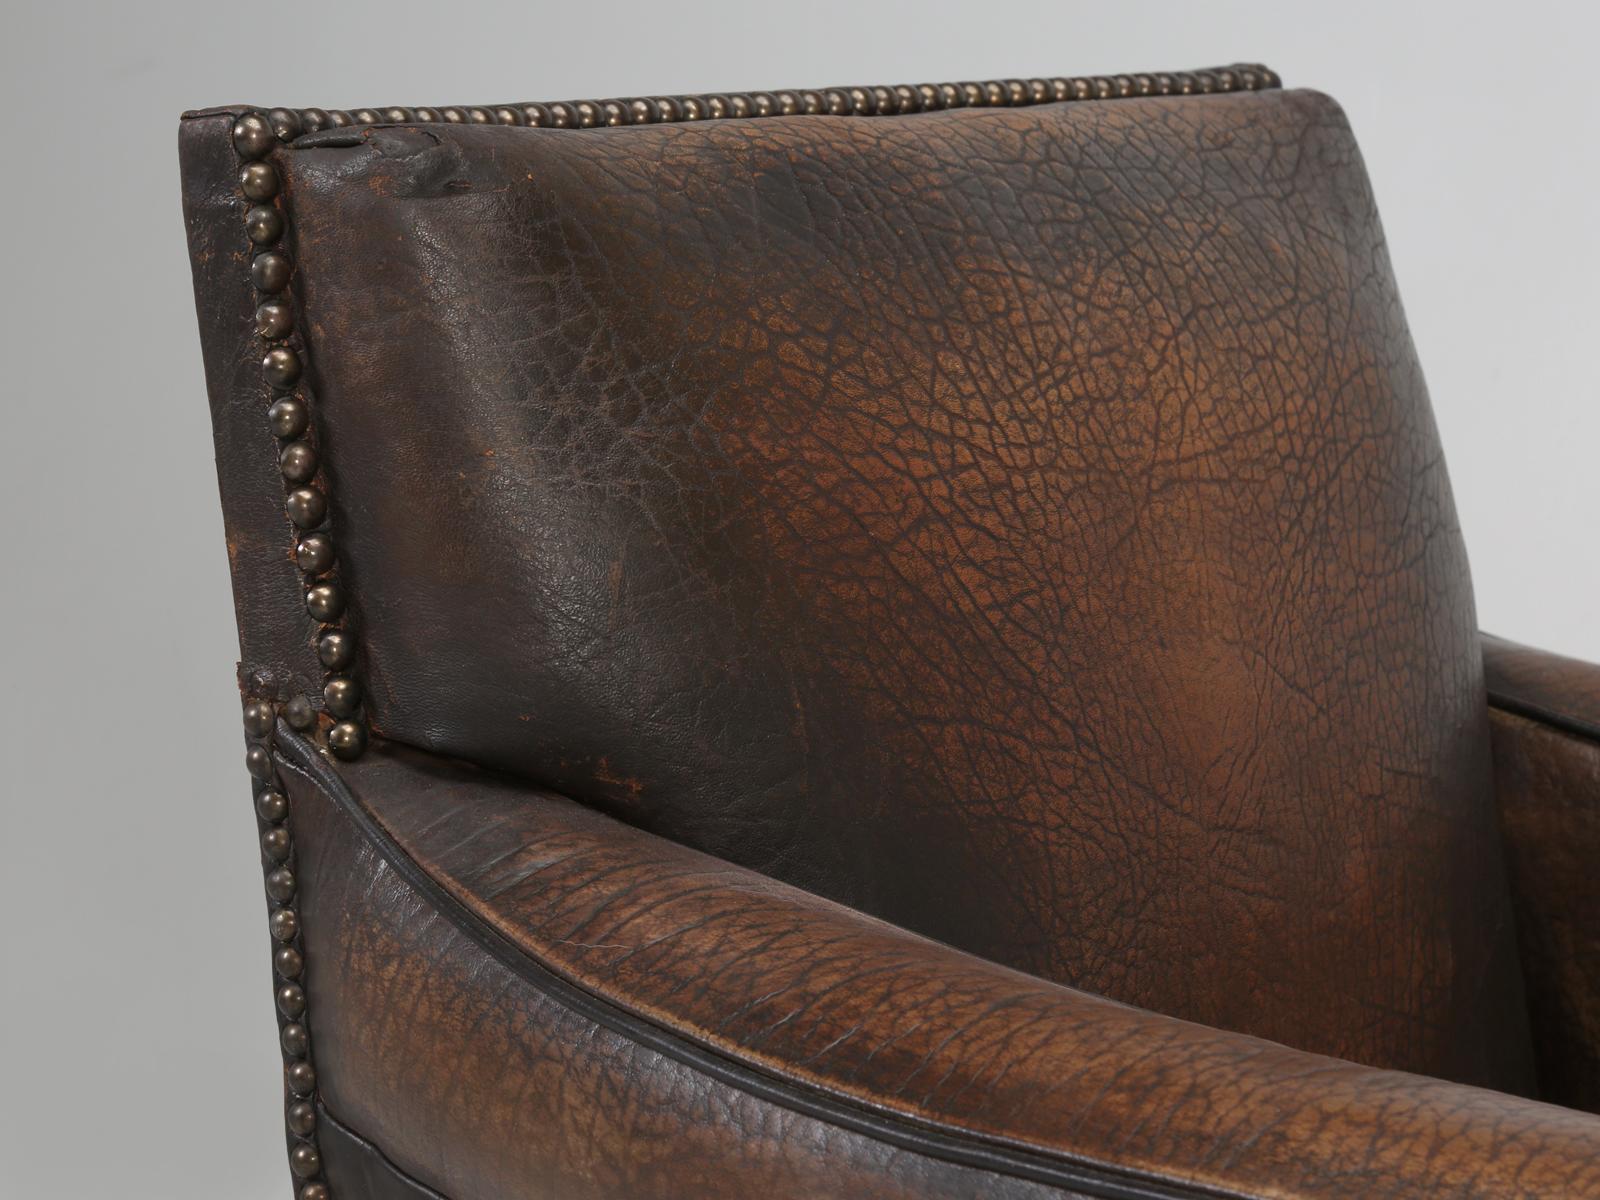 Art Deco French Leather Club Chair in an Elephant Pattern Embossed Cowhide, Restored